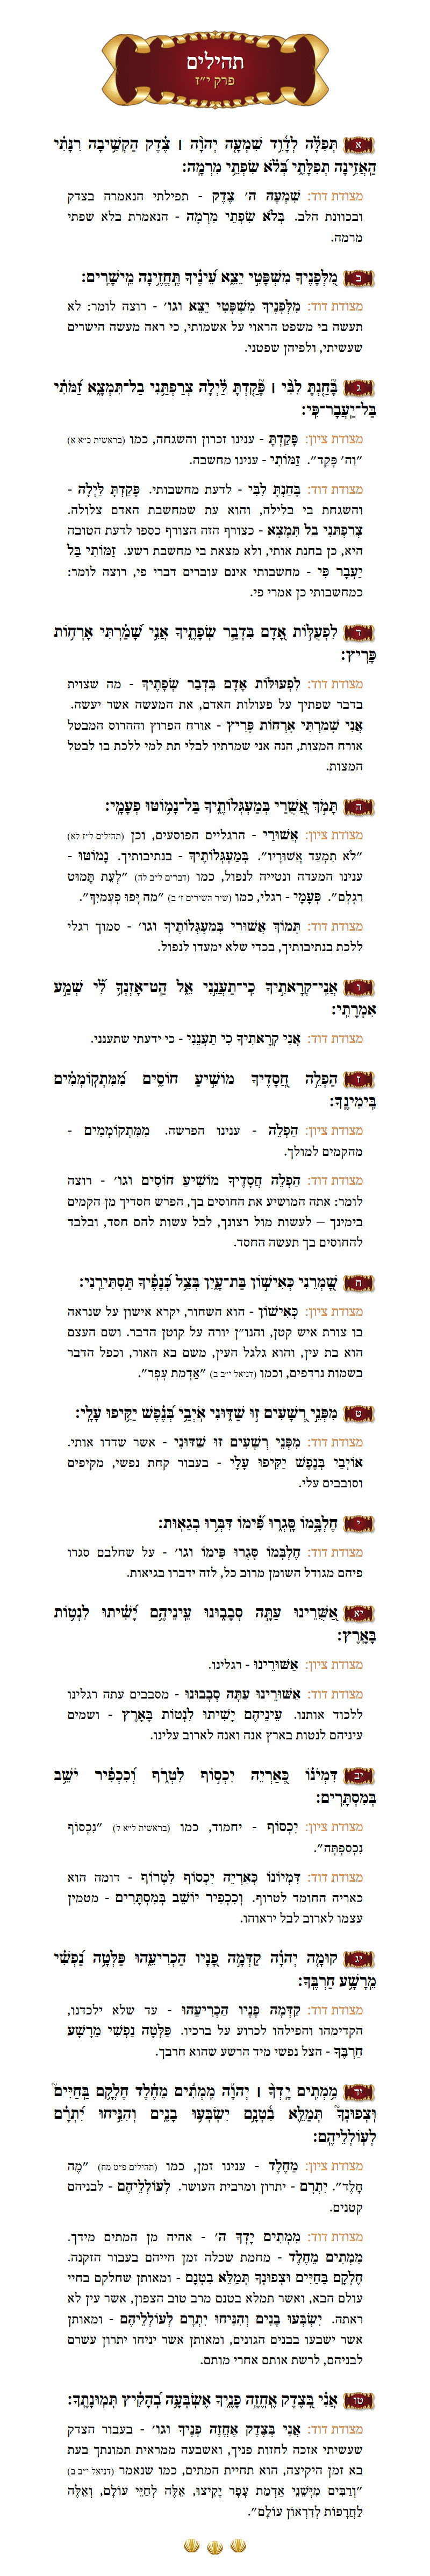 Sefer Tehillim Chapter 107 with commentary